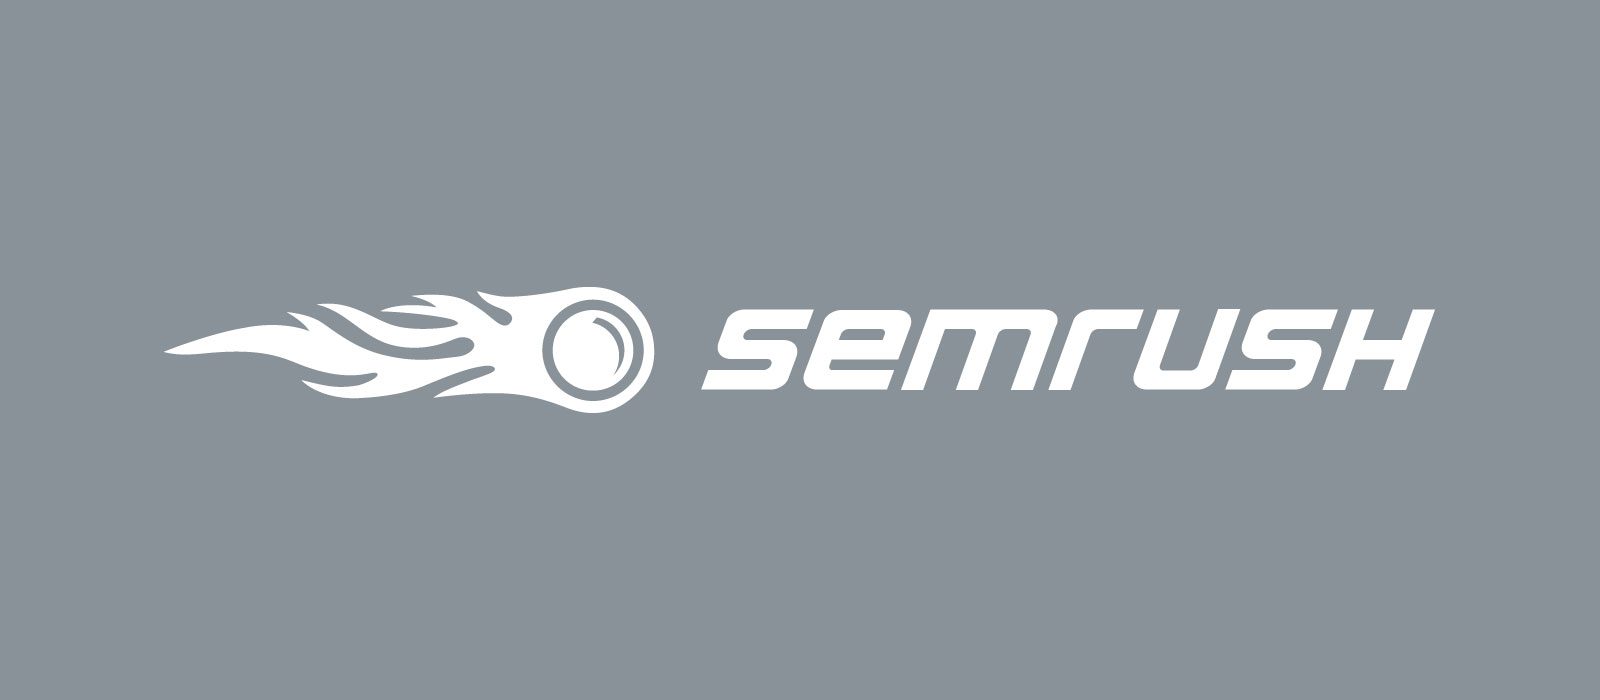 semrush project how to